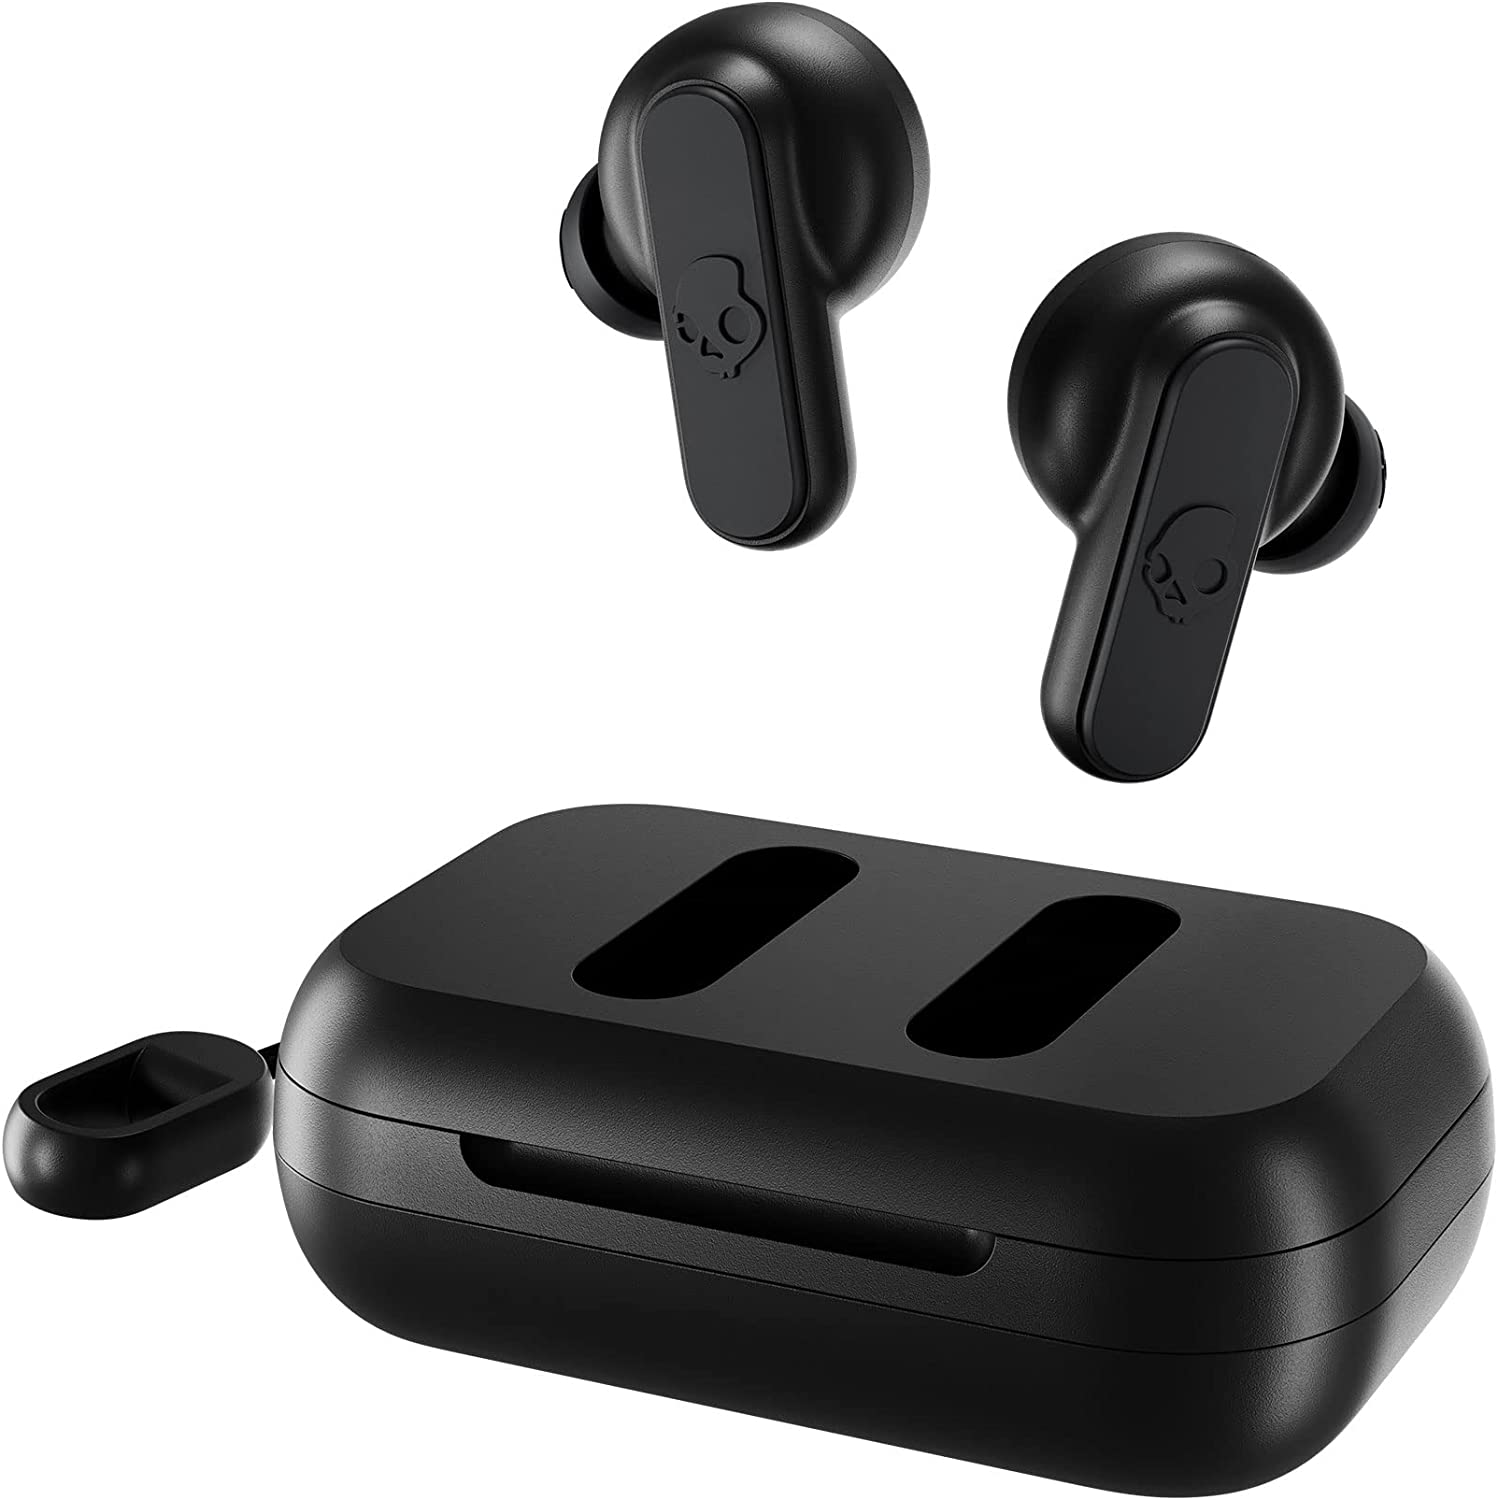 Skullcandy Dime 2 True Wireless In-Ear Bluetooth Earbuds, Use with iPhone and Android